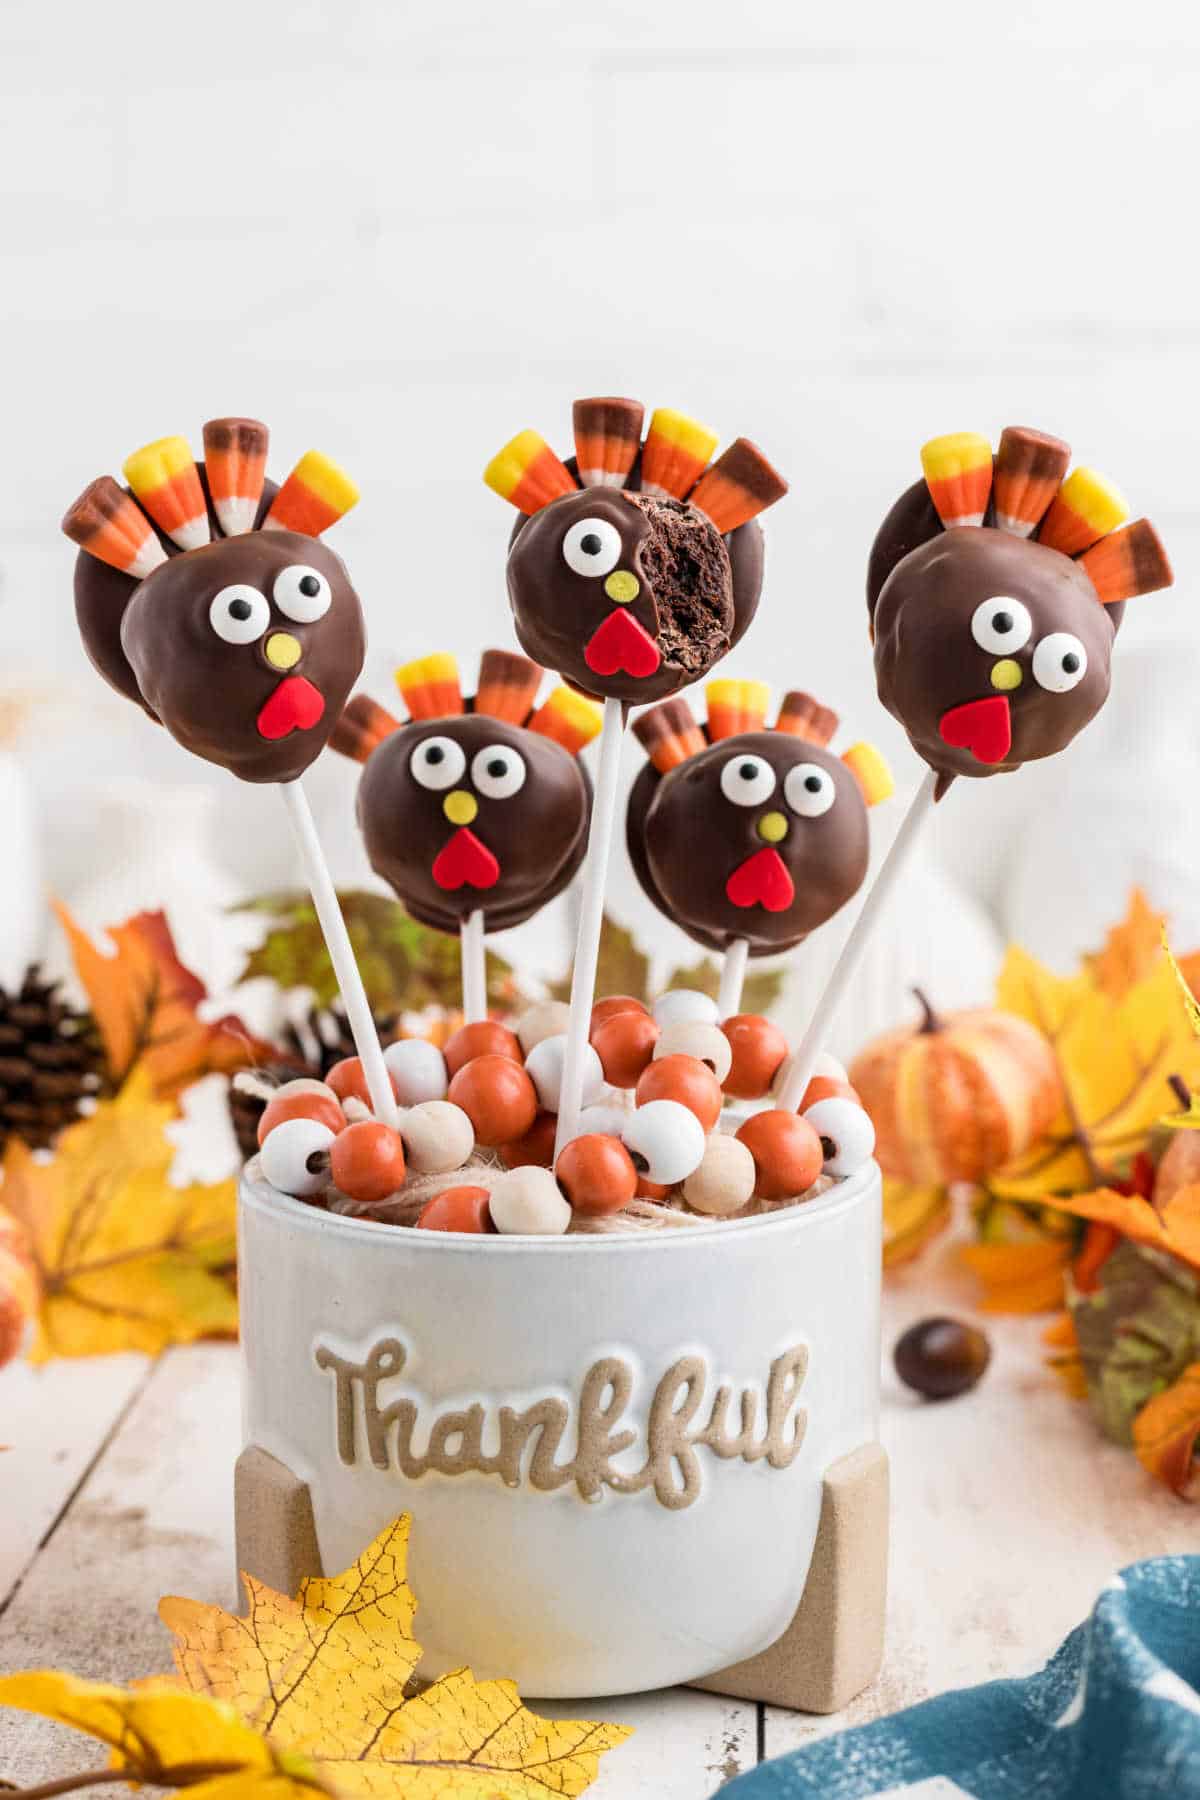 A thanksgiving cake pop recipe, one showing a bite taken out.